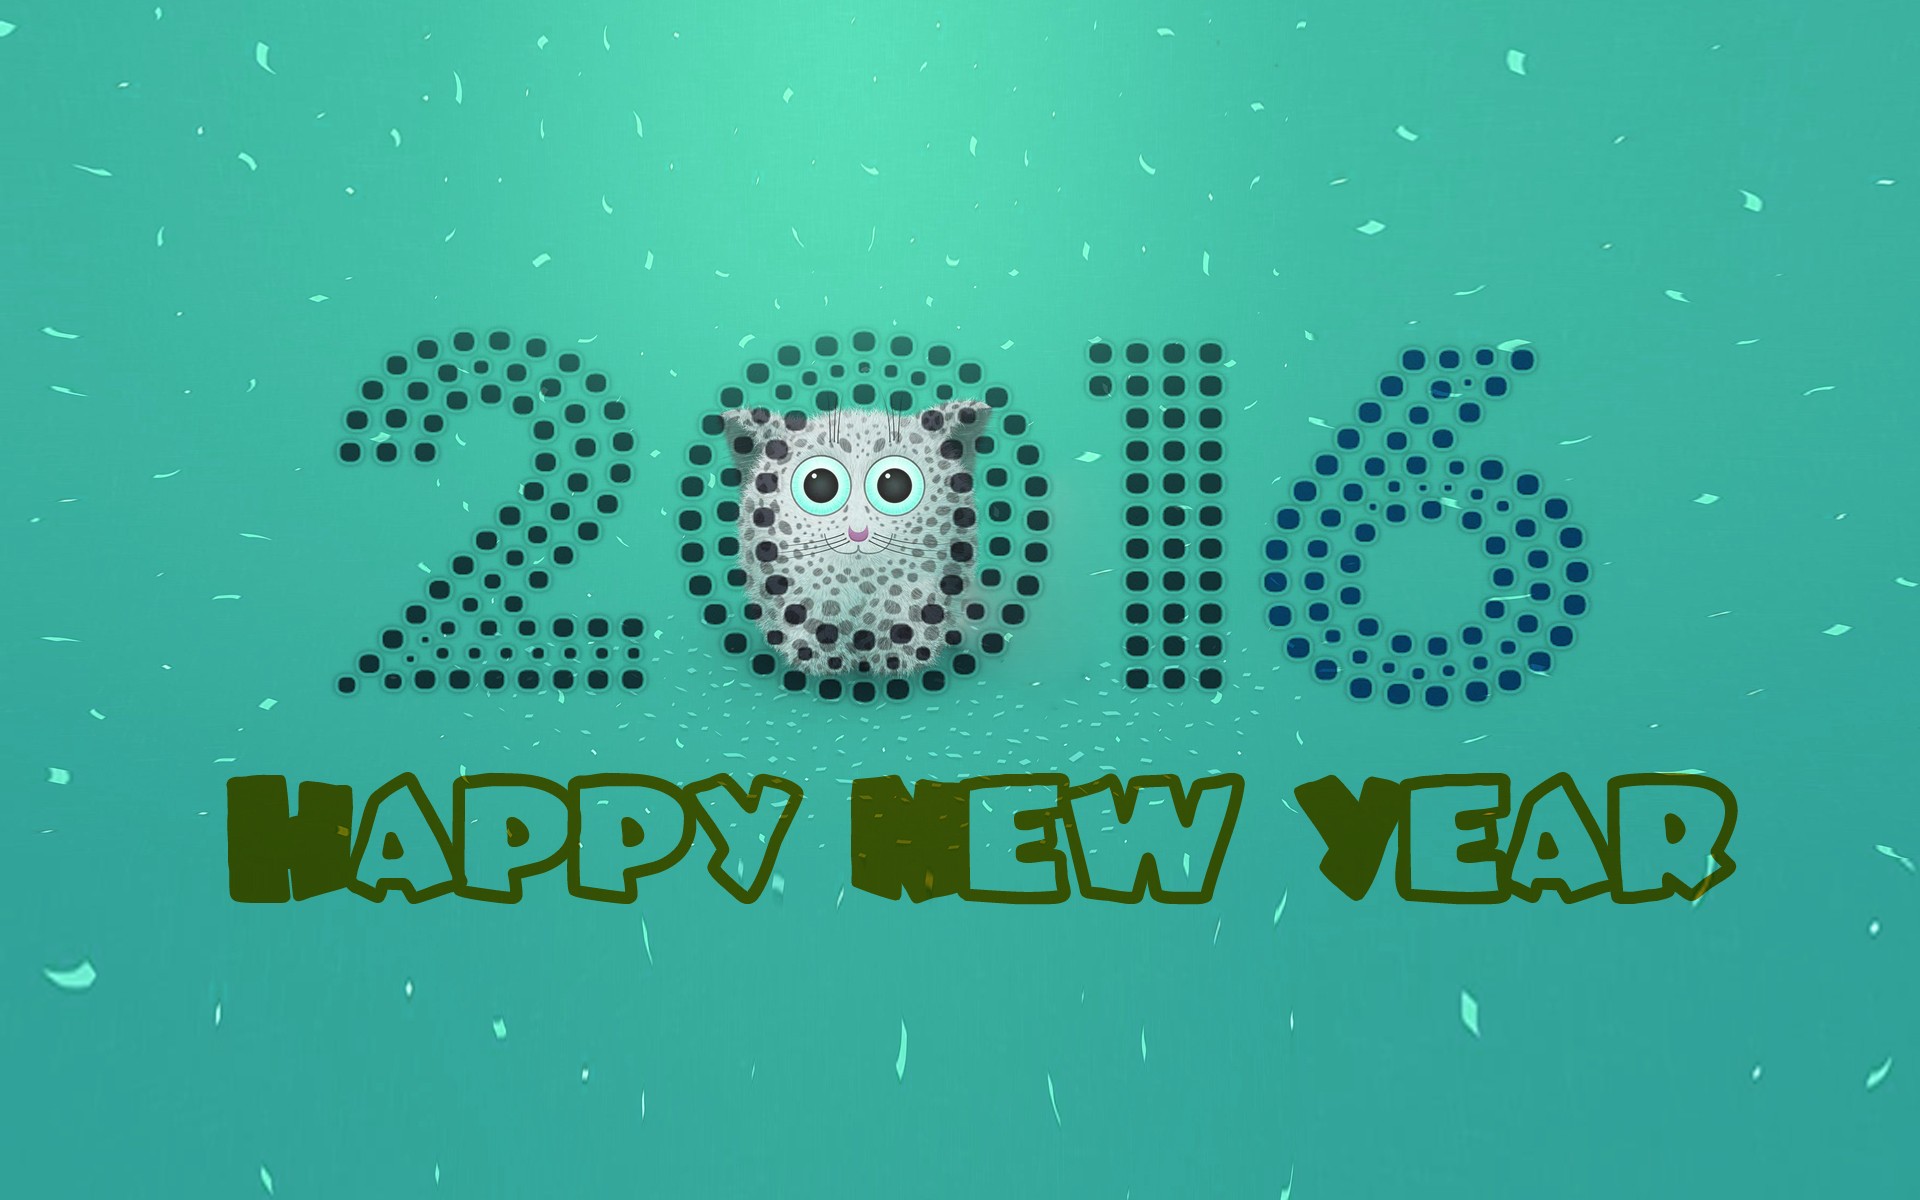 Beautiful Happy New Year Wallpapers HD (2)